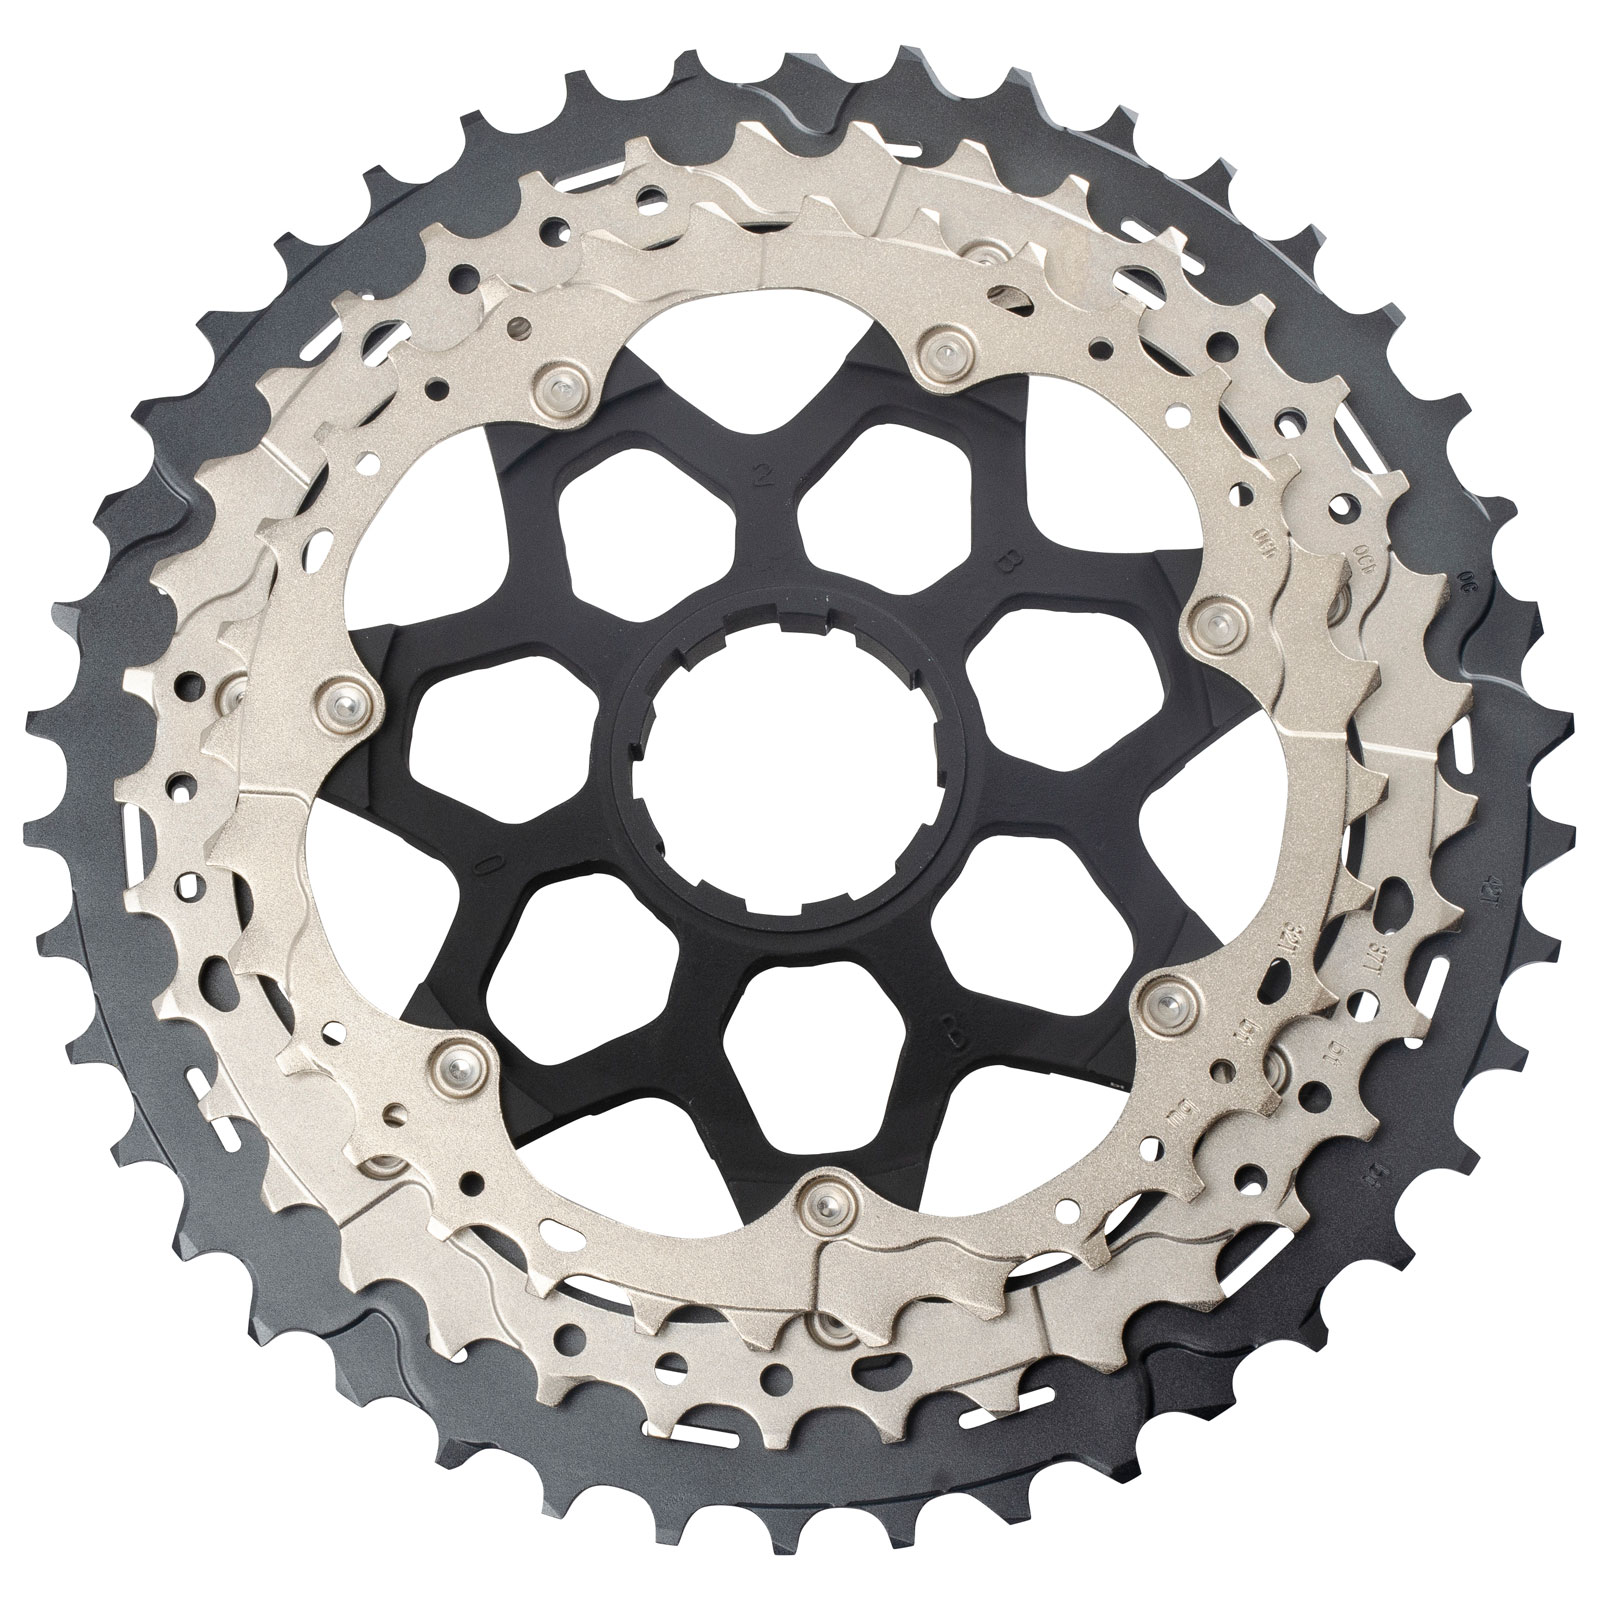 Picture of Shimano Sprocket for Deore XT / SLX 11-speed Cassette - 32/37/42 teeth for 11-42 (Y1VN98030) - CS-M7000